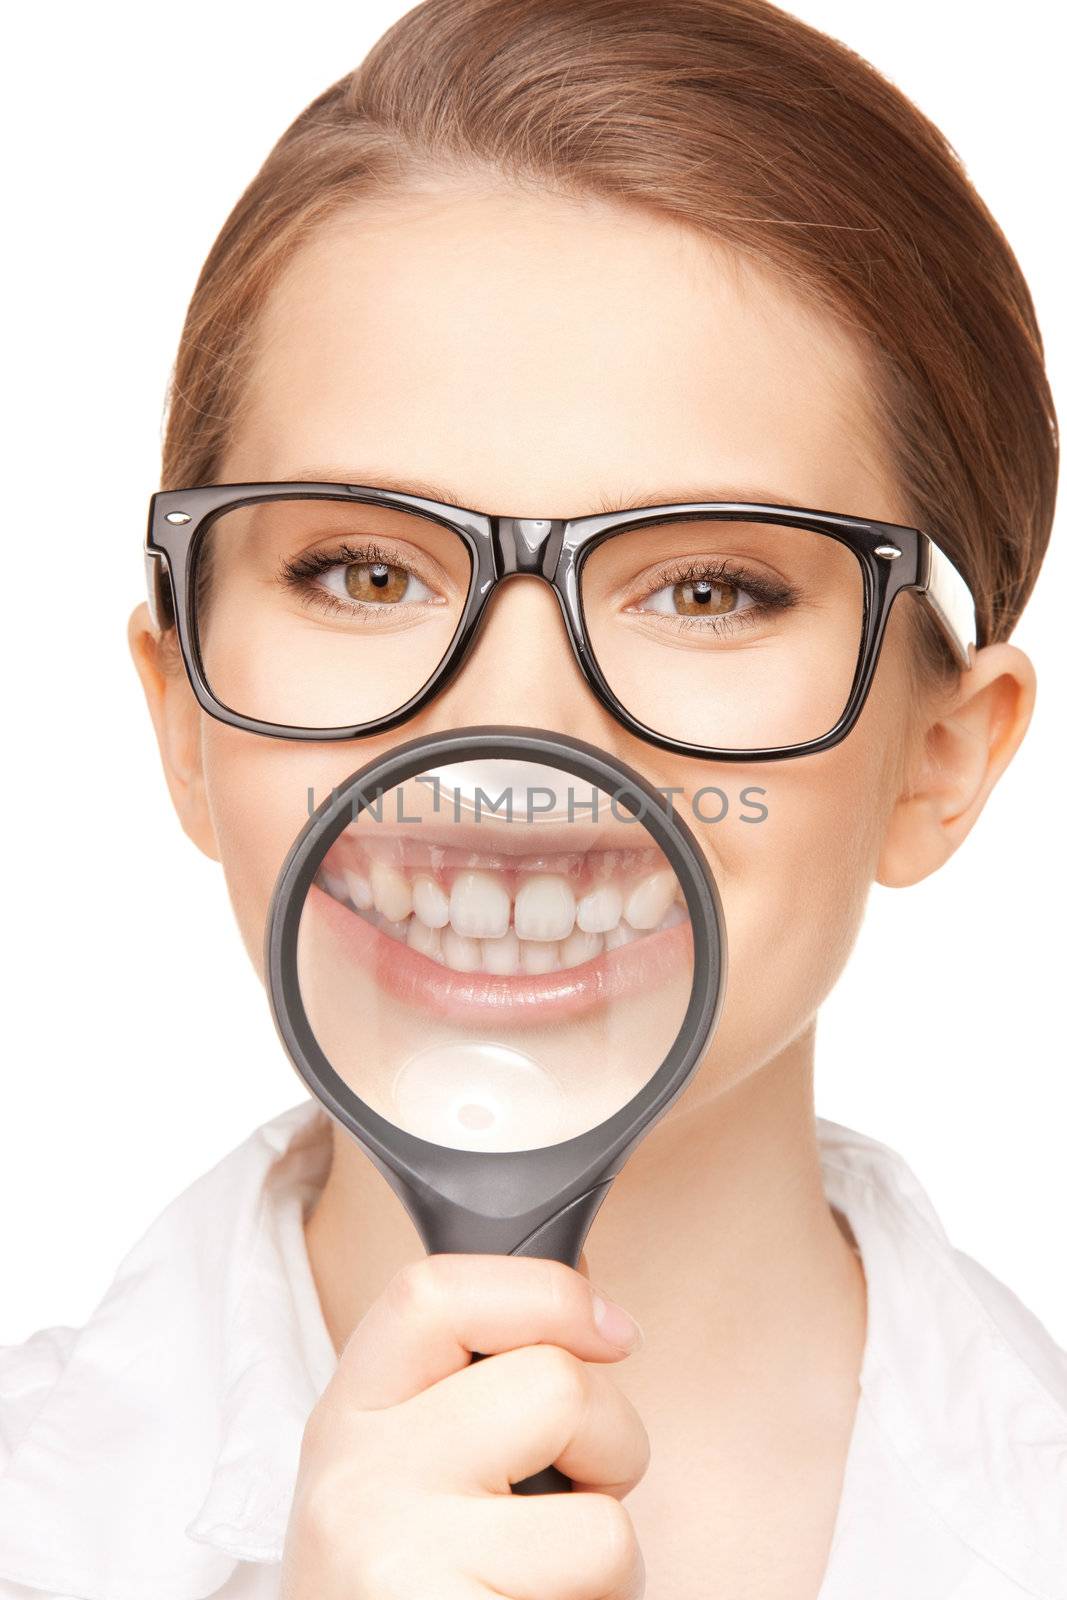 woman with magnifying glass showing teeth by dolgachov